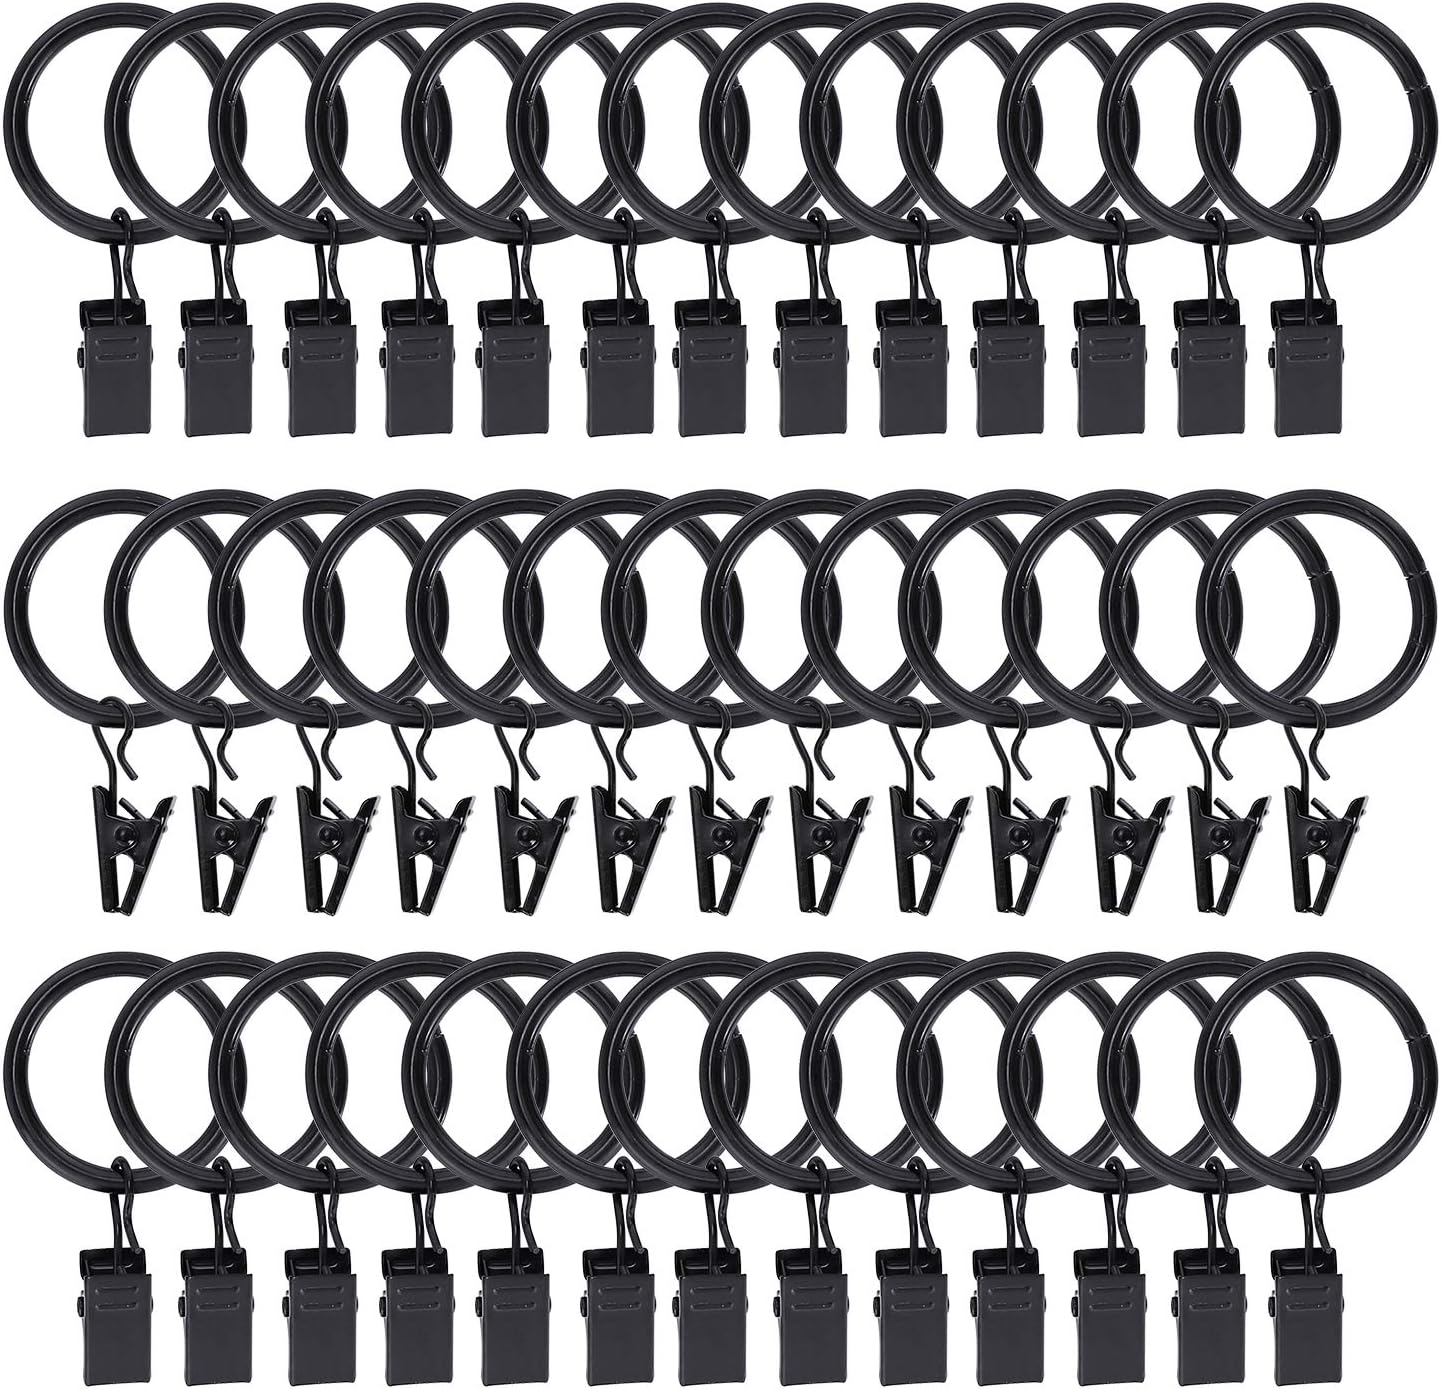 Buy LLPJS 60 Pack Metal Curtain Rings with Clips, Curtain Clip Rings Hooks  for Hanging Drapery Drapes Bows, Curtain Rod Rings 1.5 inch Interior  Diameter, White Online at Low Prices in India -